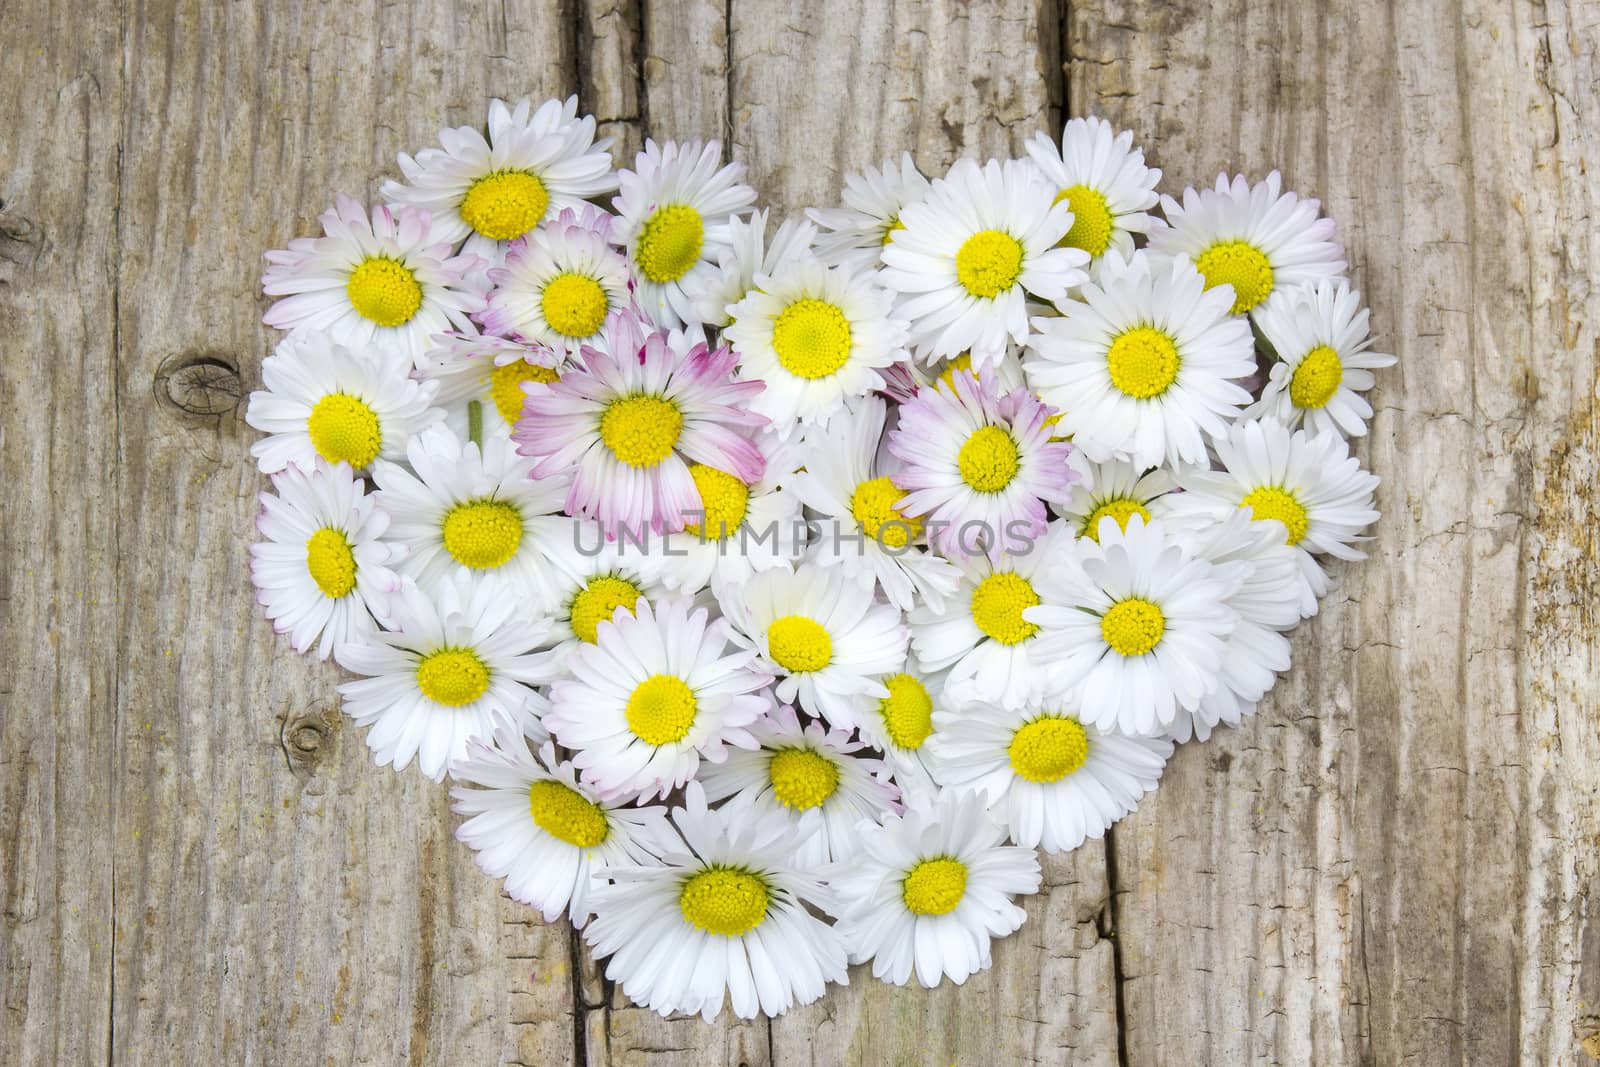 daisy flowers in heart shape on wooden background by miradrozdowski